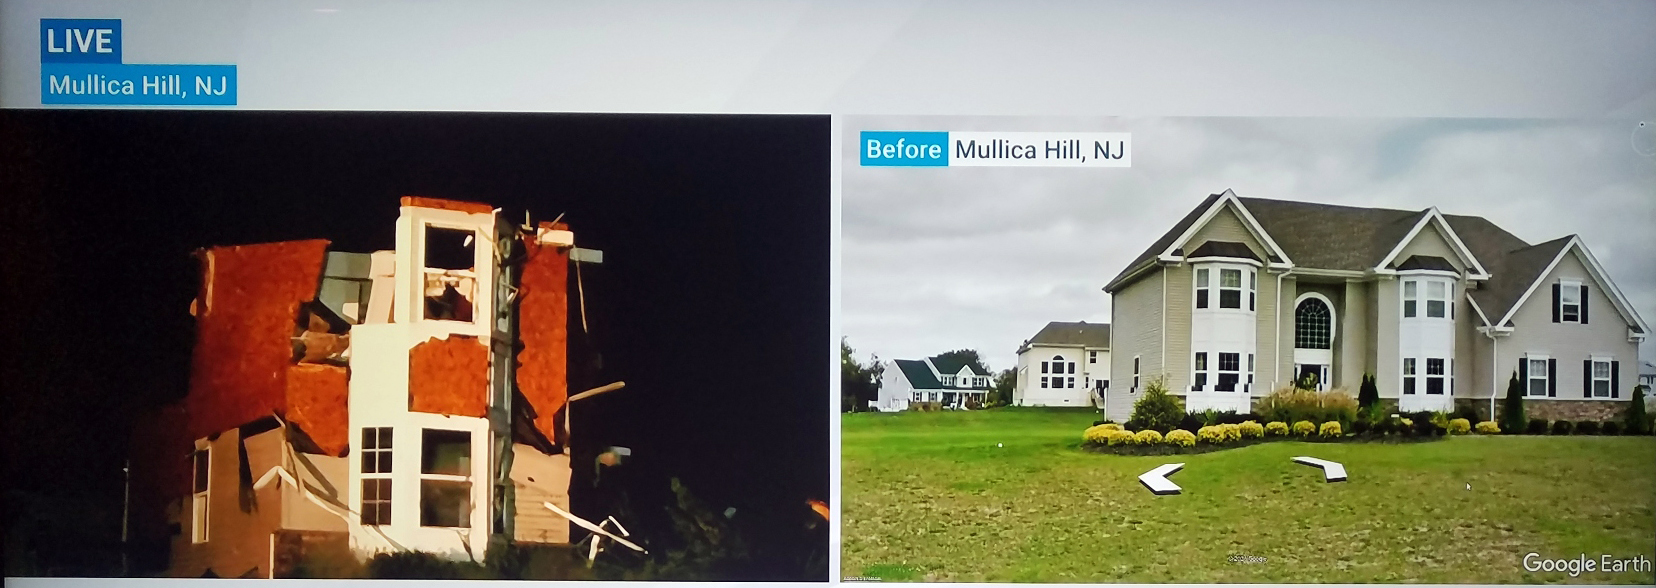 On the left, the remains of a home in the area of Mullica Hill where the EF-3 damage occurred earlier in the evening. The photo on the right shows the home prior to its destruction.